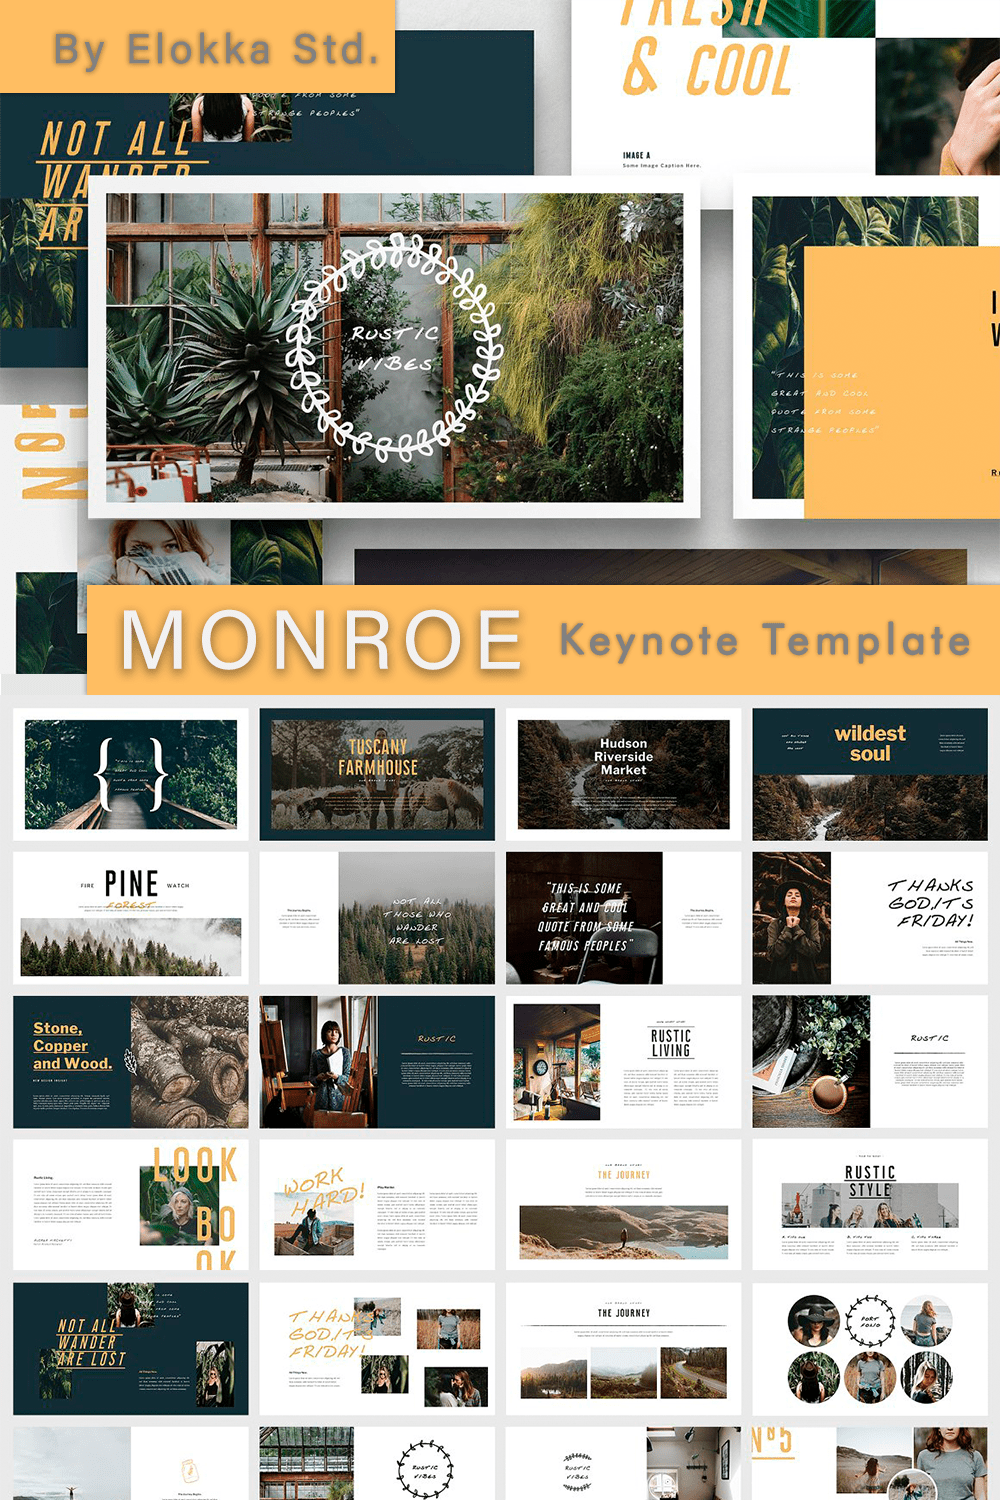 MONROE - Keynote Template - preview of Pinterest image.